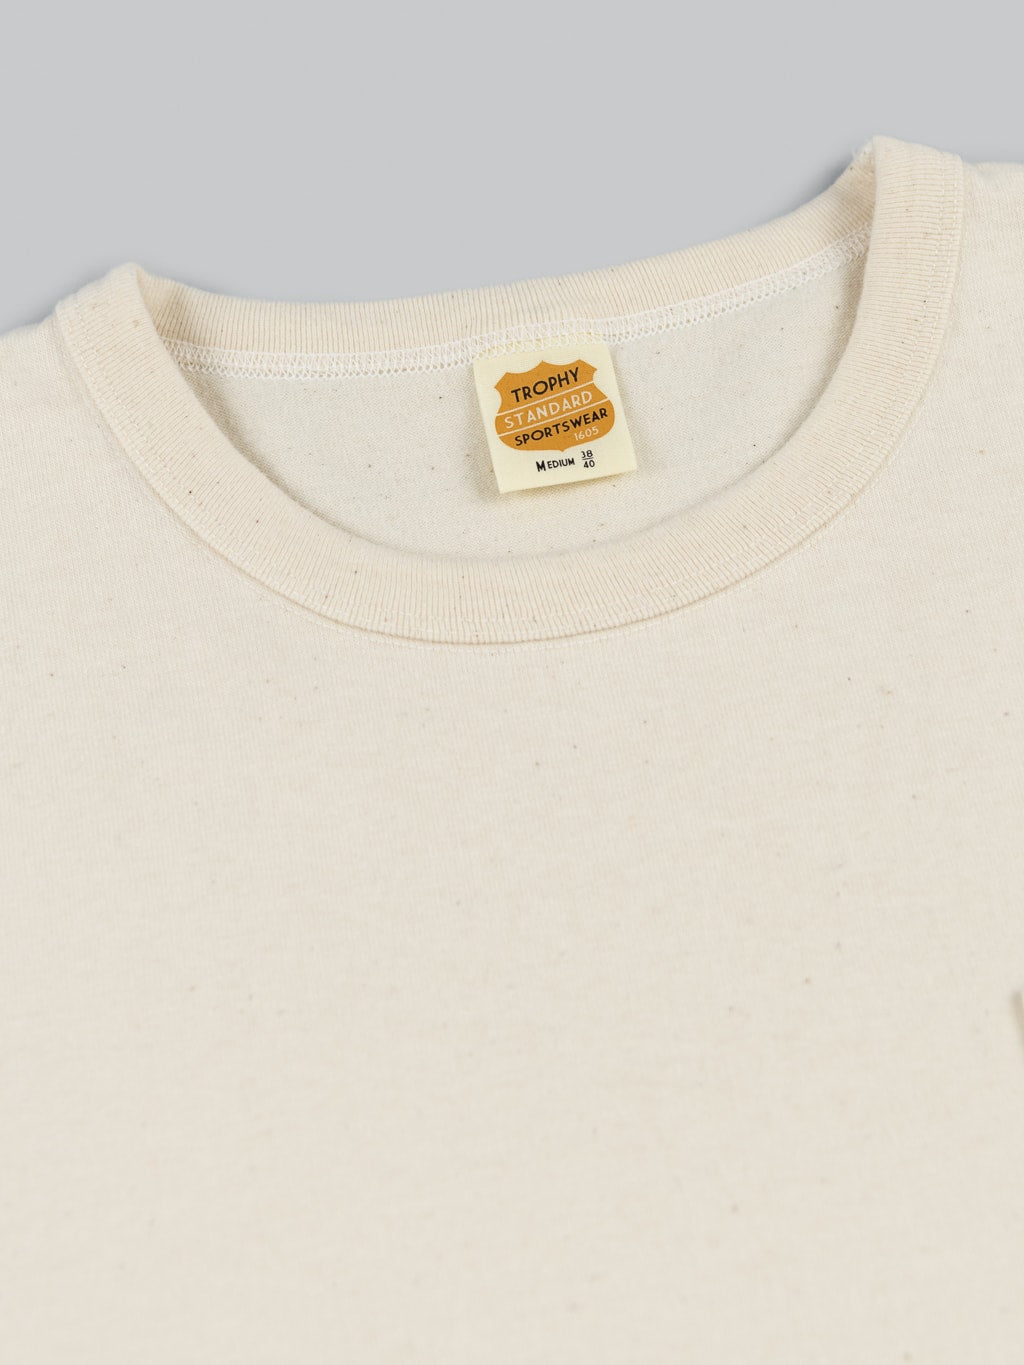 trophy clothing od pocket tee natural  collar tag